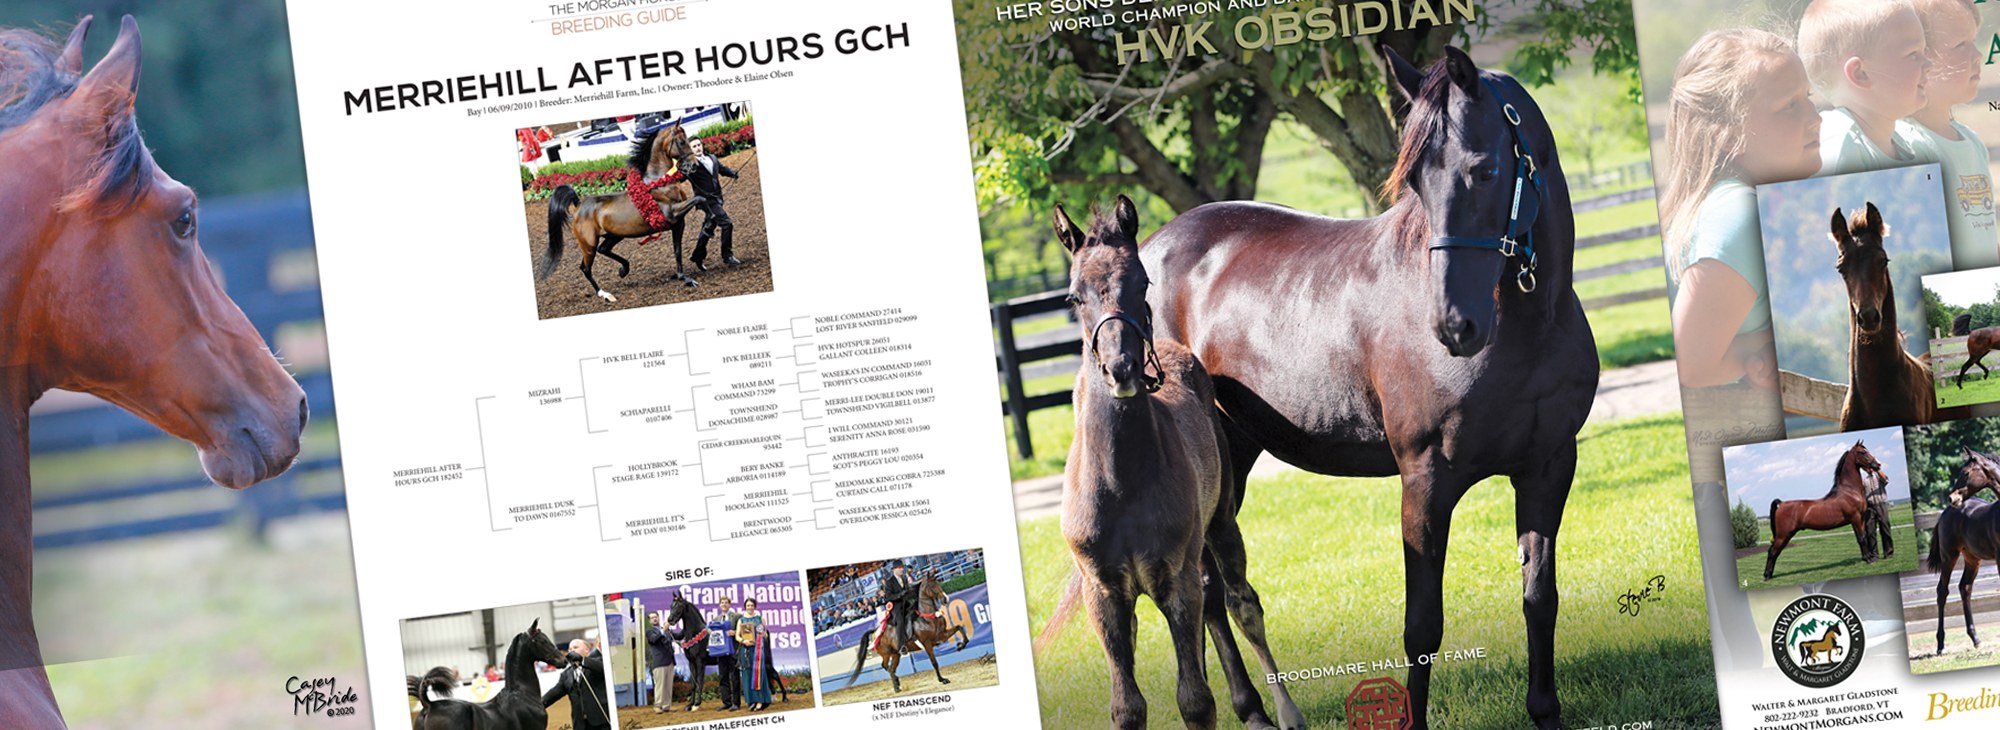 Advertising Sample from The Morgan Horse Magazine